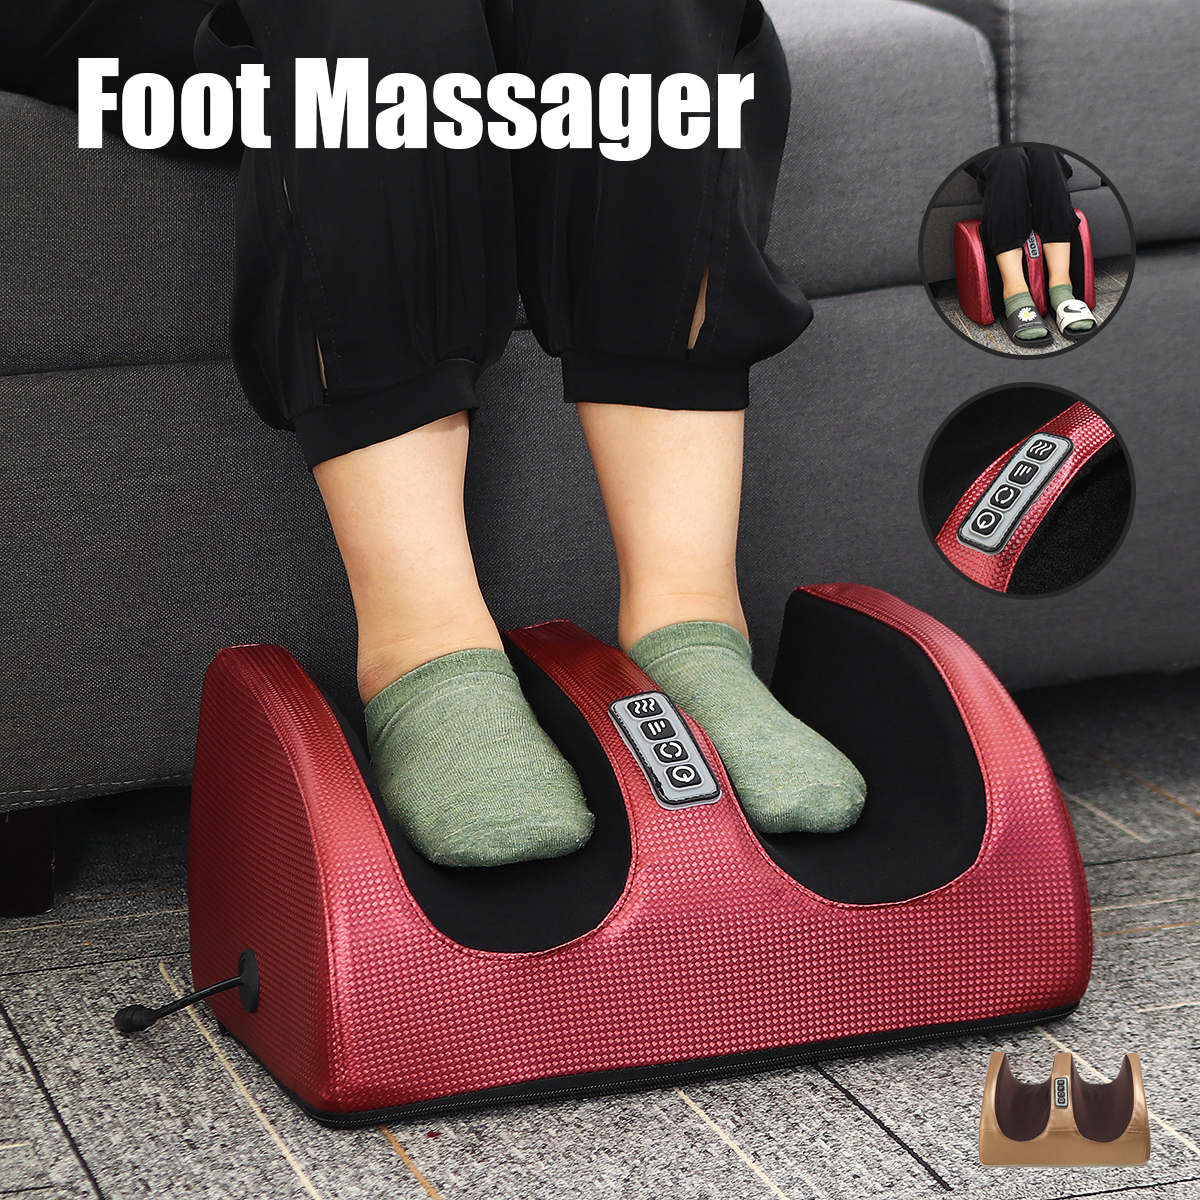 3-Speed-Electric-Foot-Massager-Machine-Vibration-Massage-Magnetism-Hot-Compress-Therapy-Leg-Relieve--1694192-1